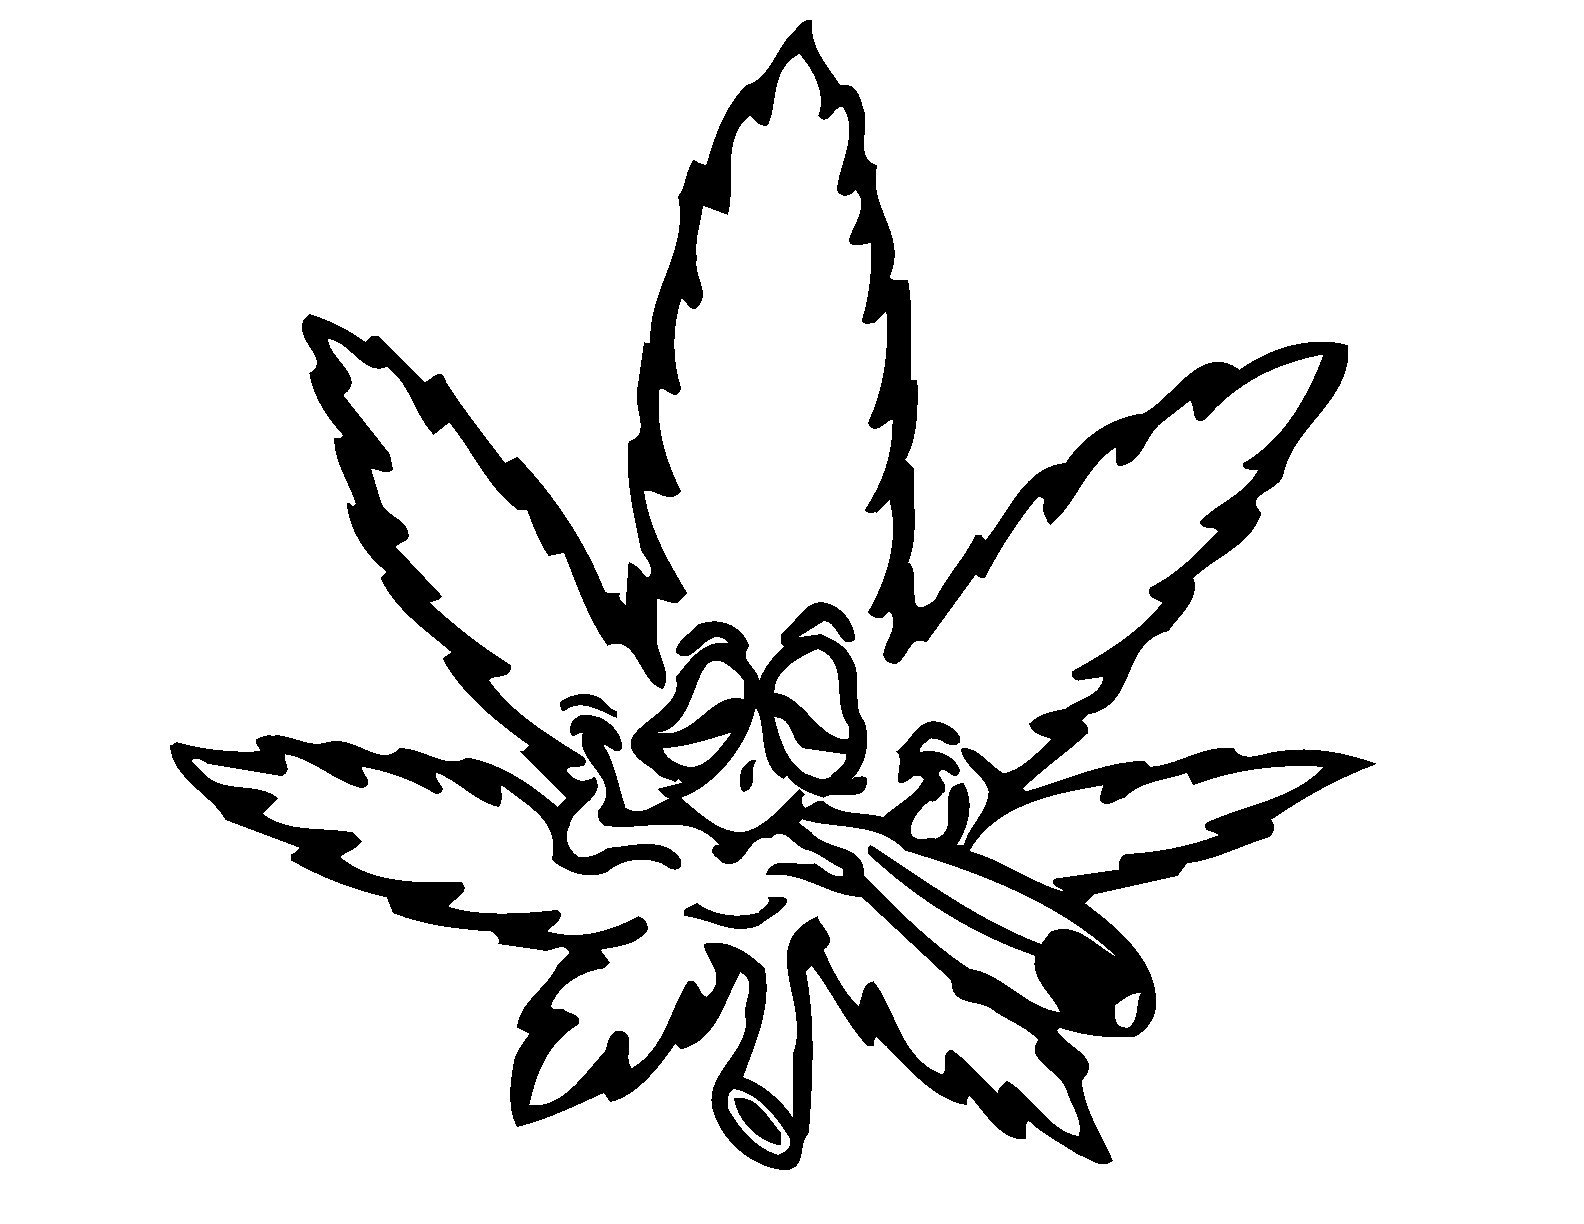 These are other Images about Pot Leaf Drawing at GetDrawings.com Free for p...